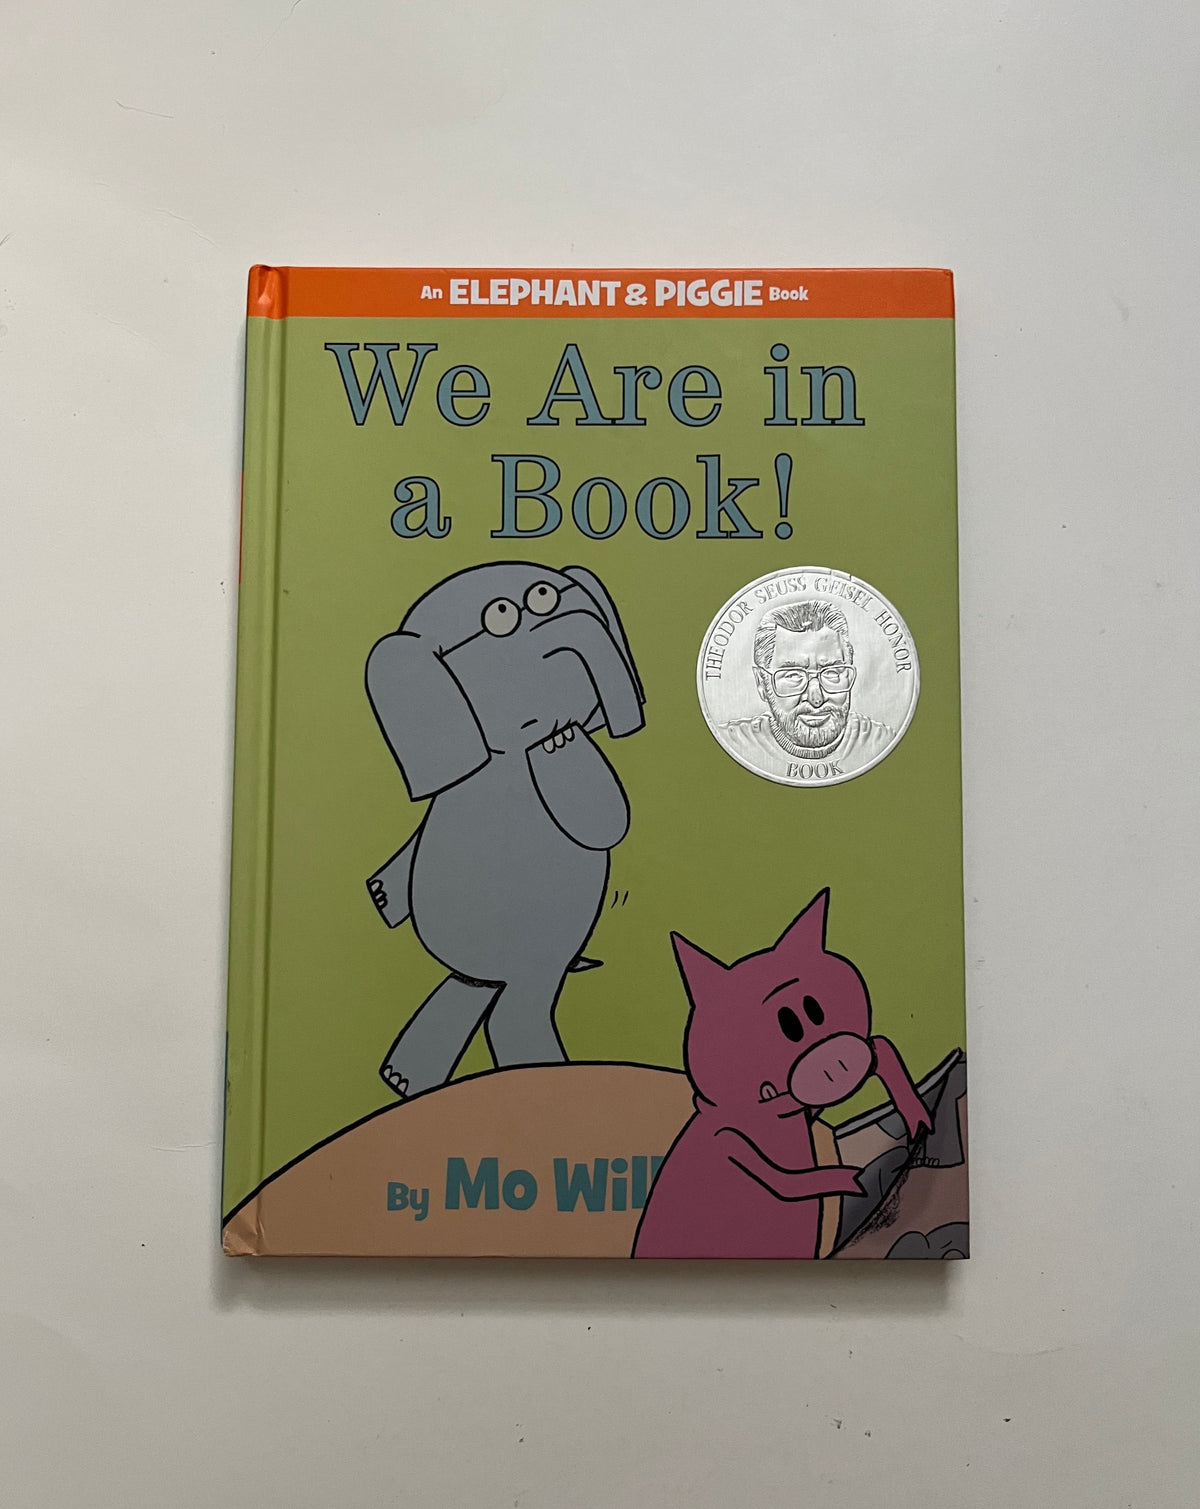 We Are in a Book by Mo Willems